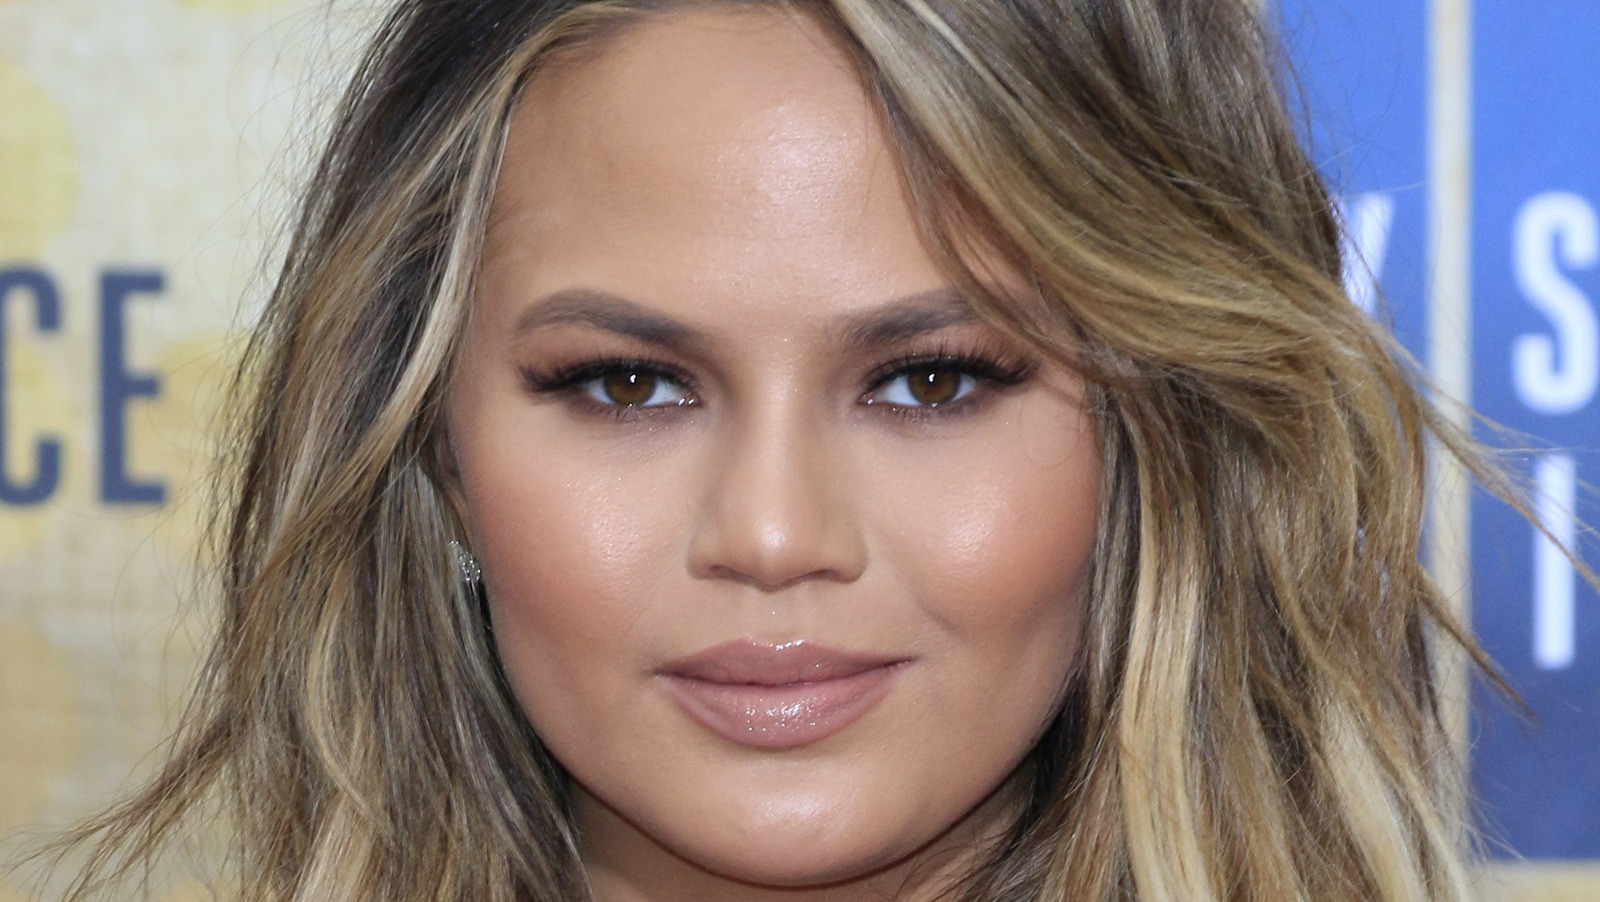 Chrissy Teigen Hints To Followers That She Might Be Exploring Surrogacy Options